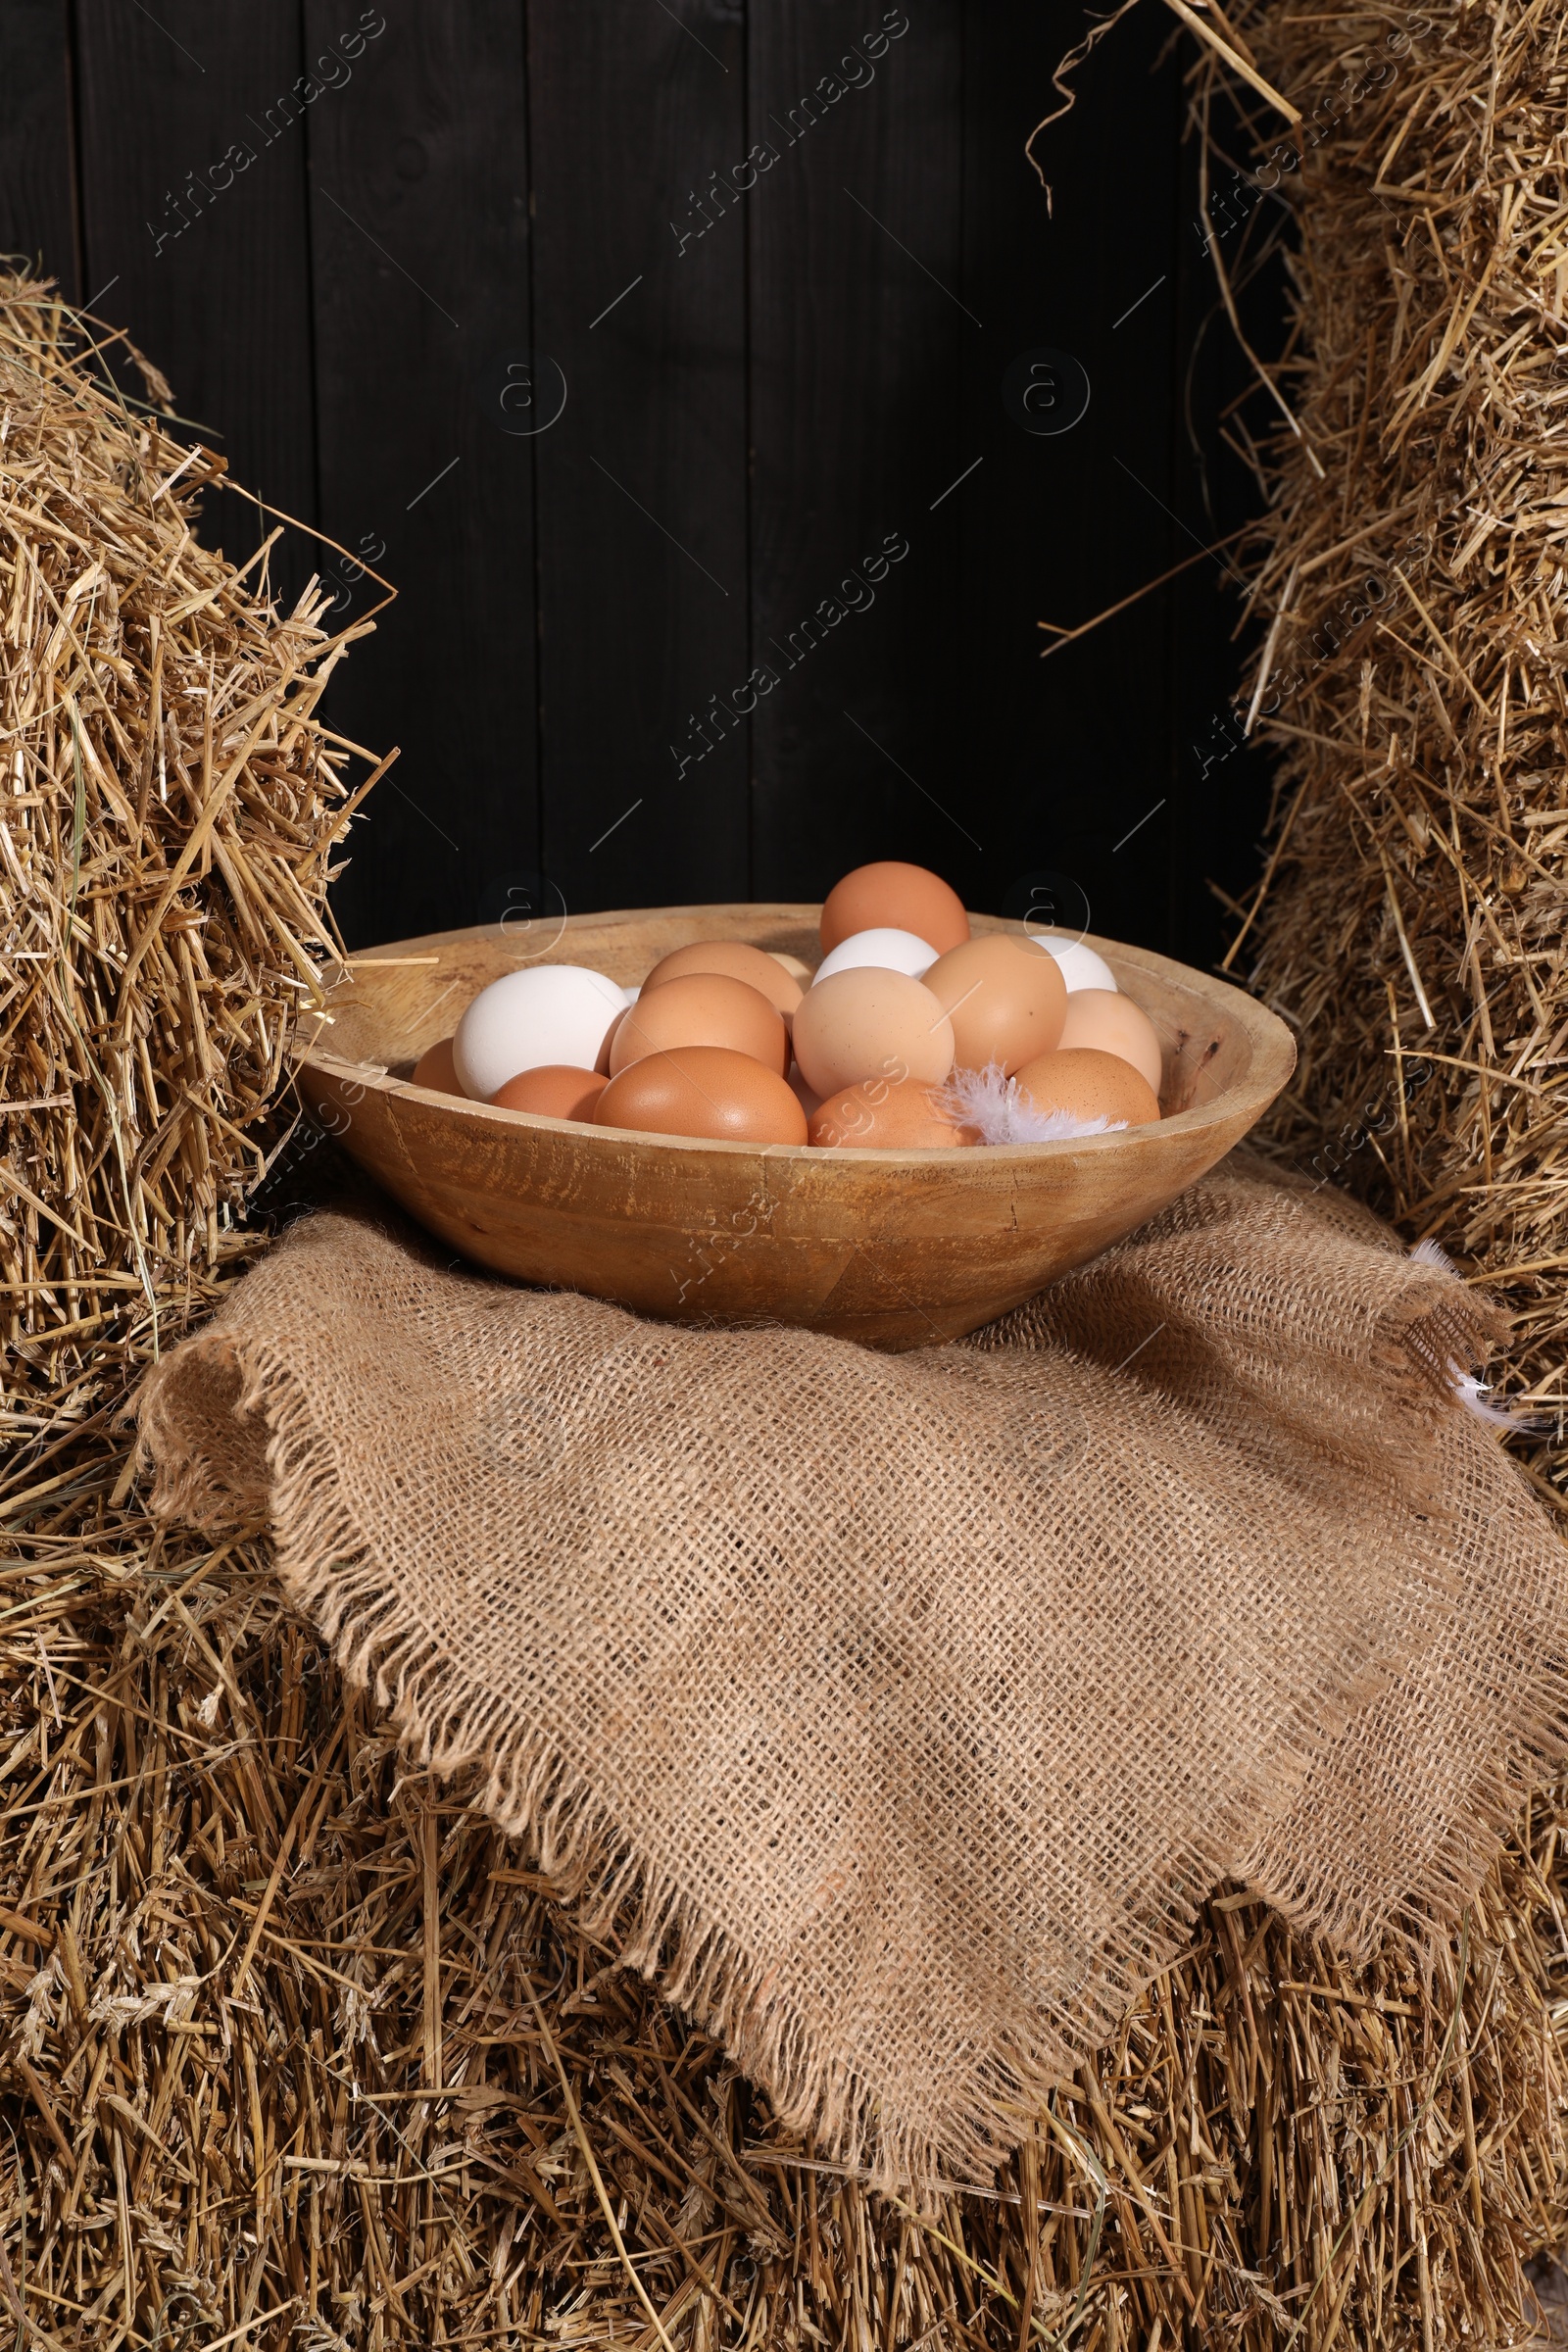 Photo of Fresh chicken eggs in bowl on dried straw bale